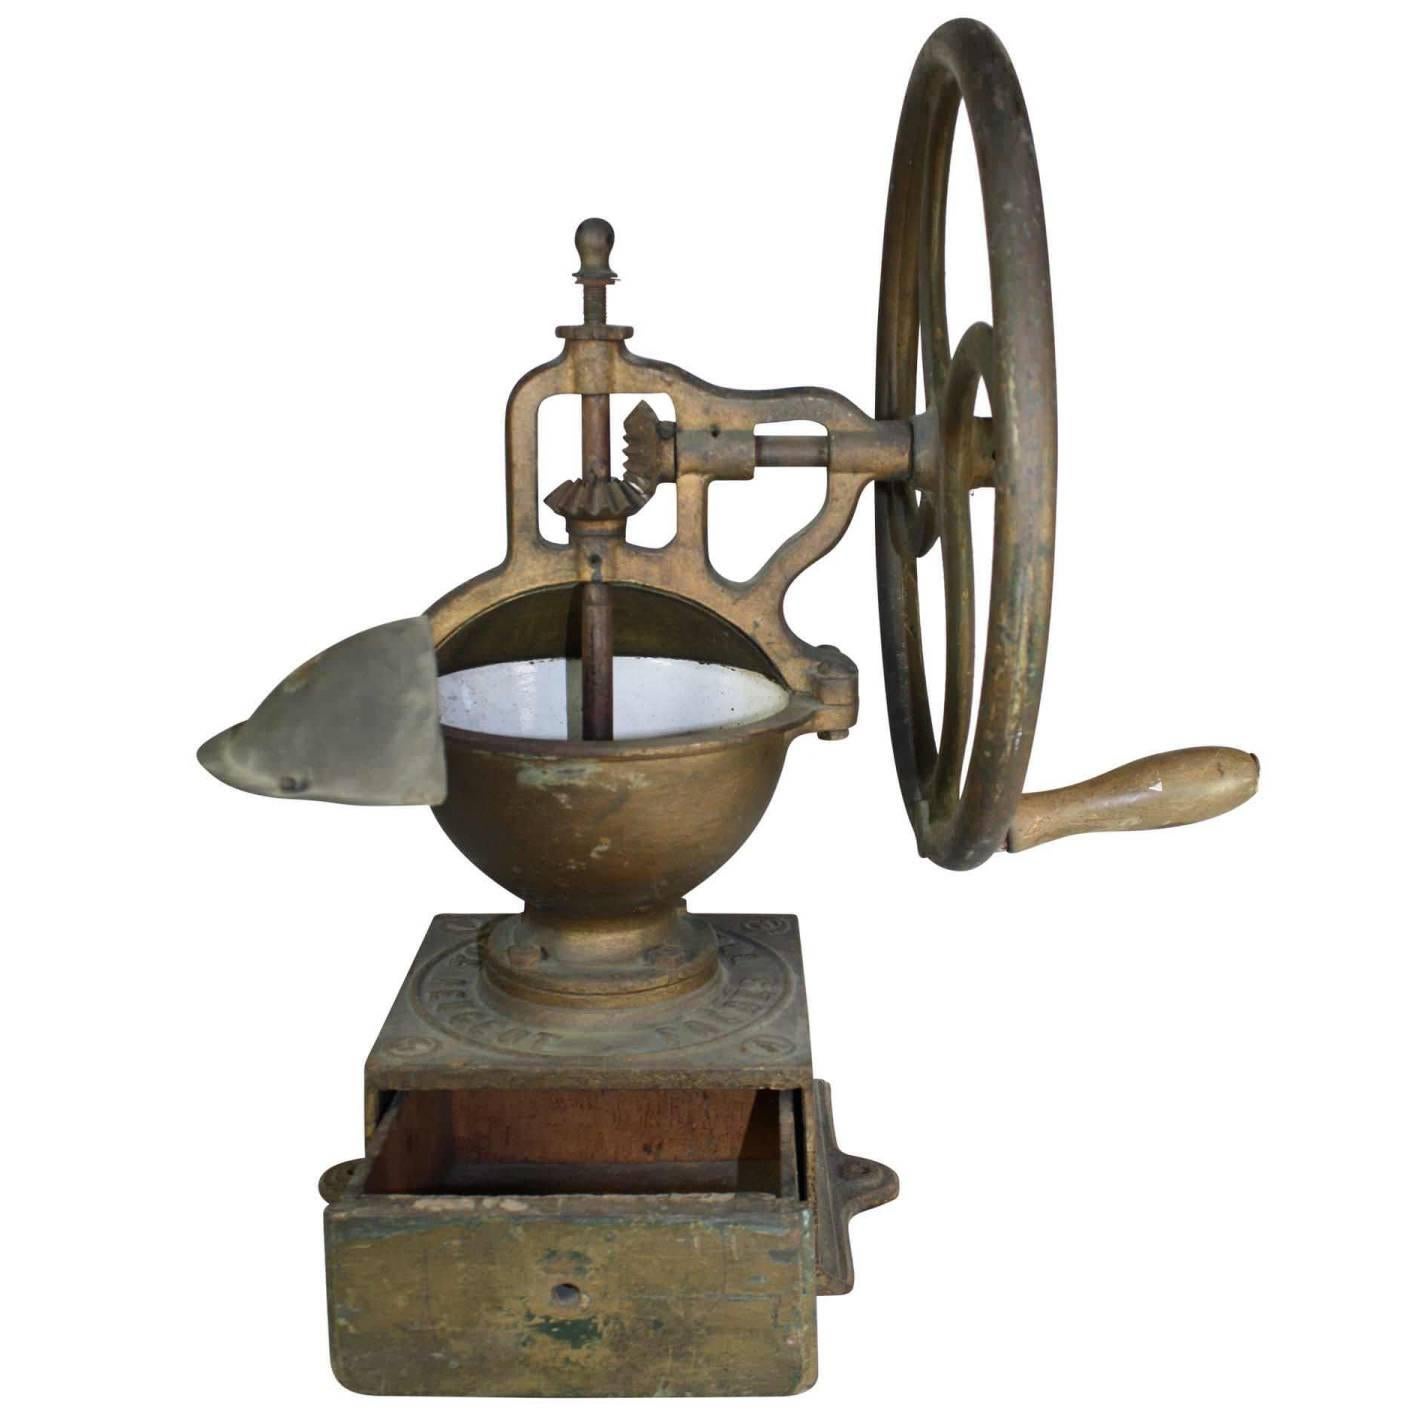 Late 19th Century Peugeot Freres Brevetes S.G.D.G. Coffee Grinder